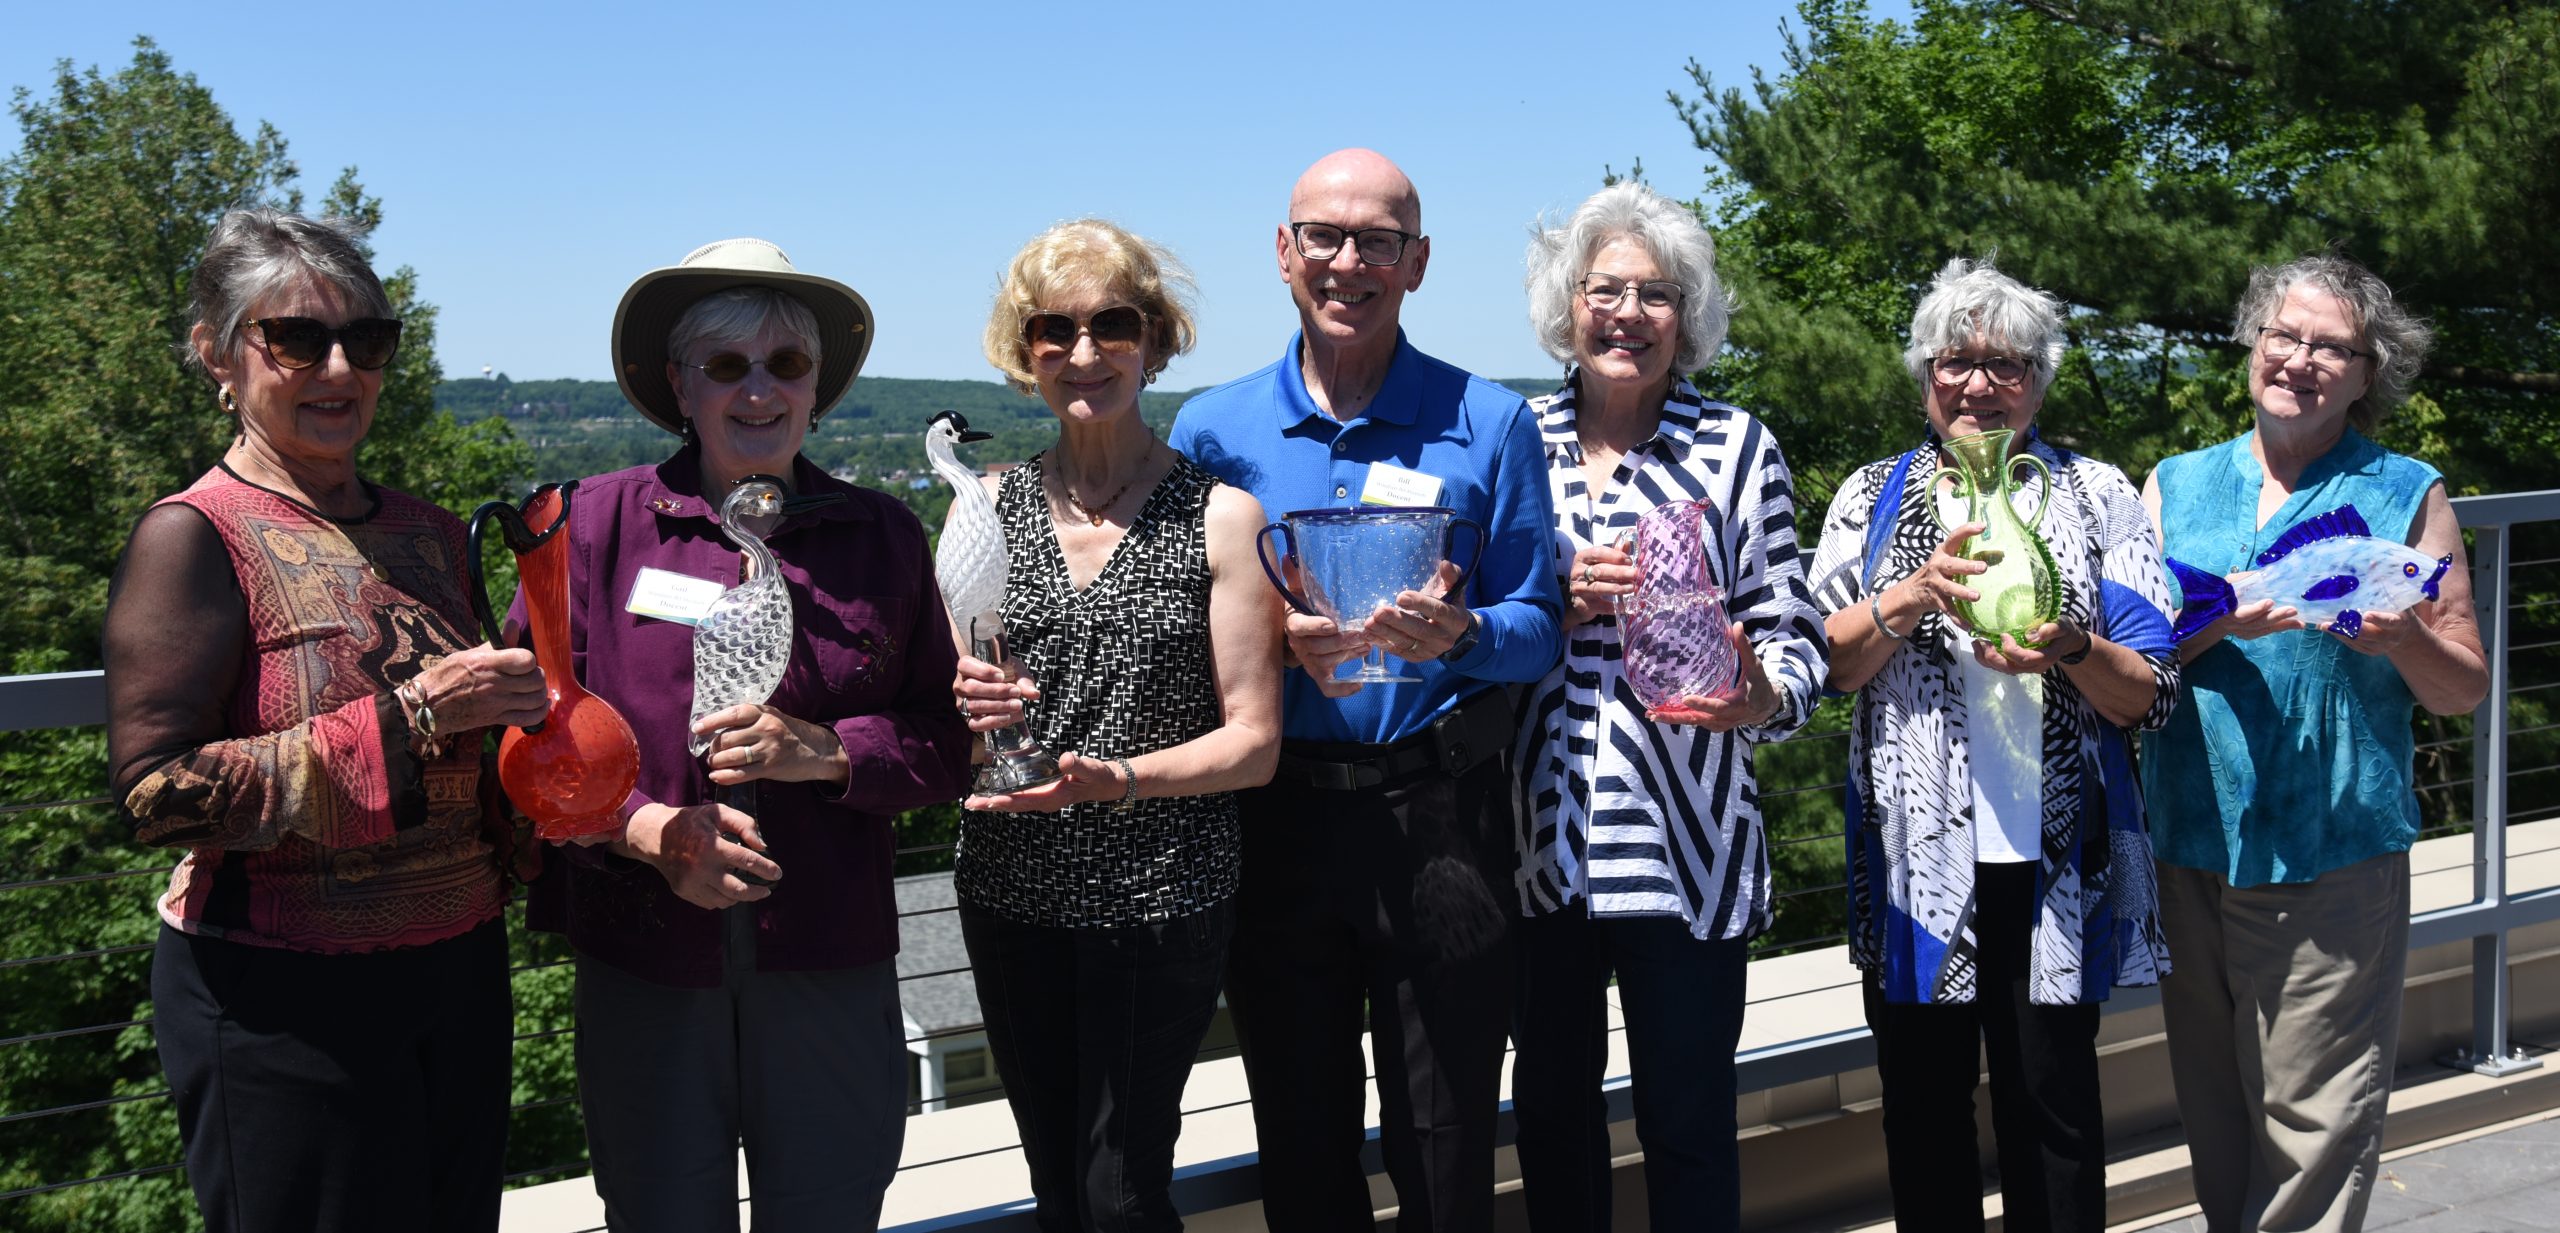 Seven people smile as they each hold a glass sculpture gift on a sunny day with blue sky and trees in the background.